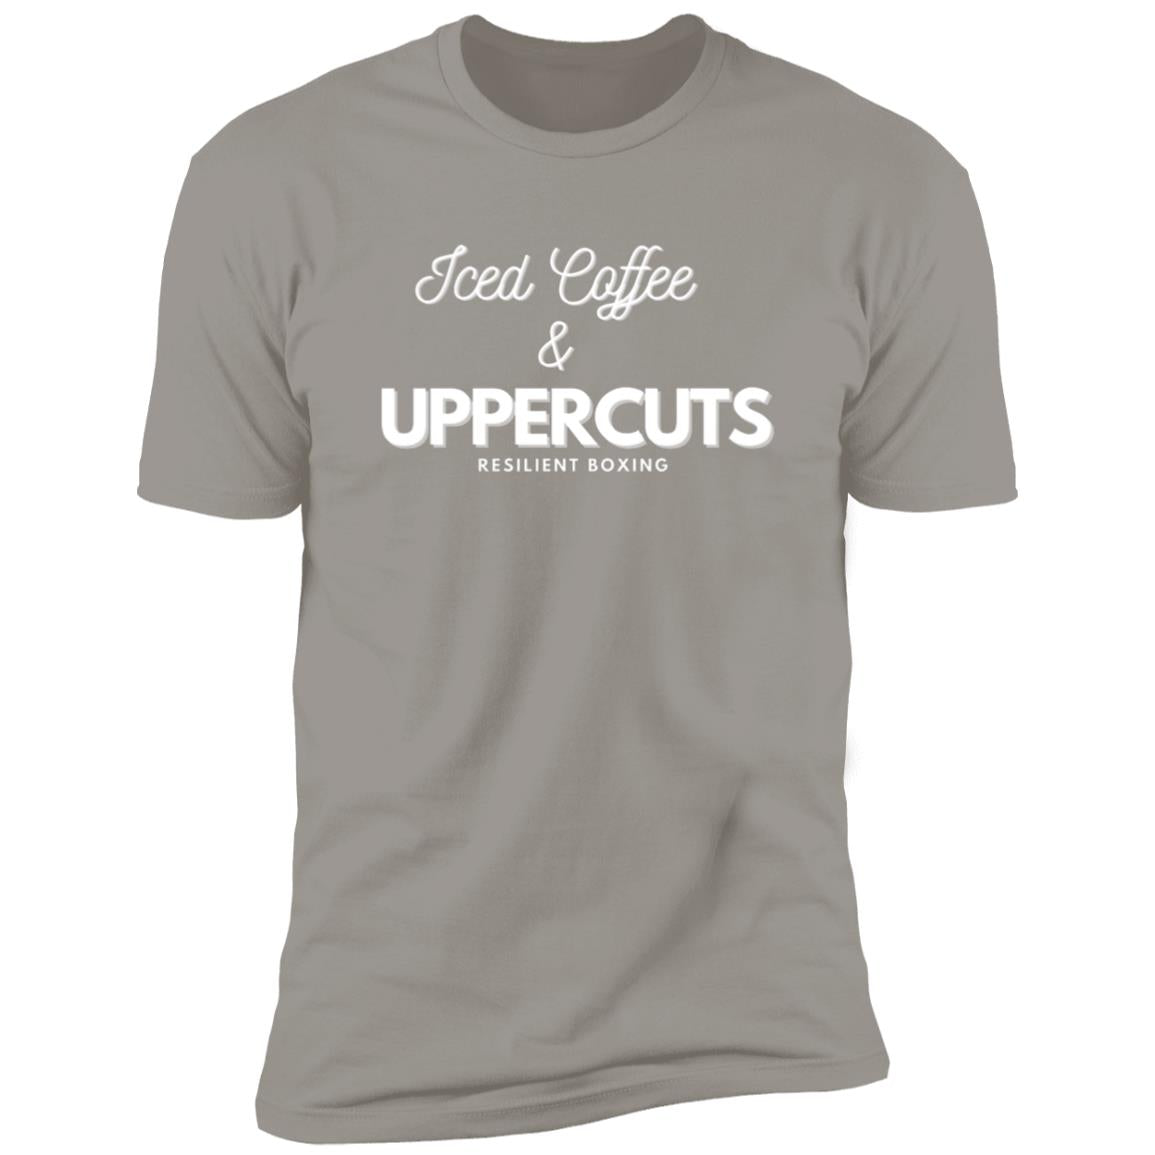 Iced Coffee and uppercuts T shirt